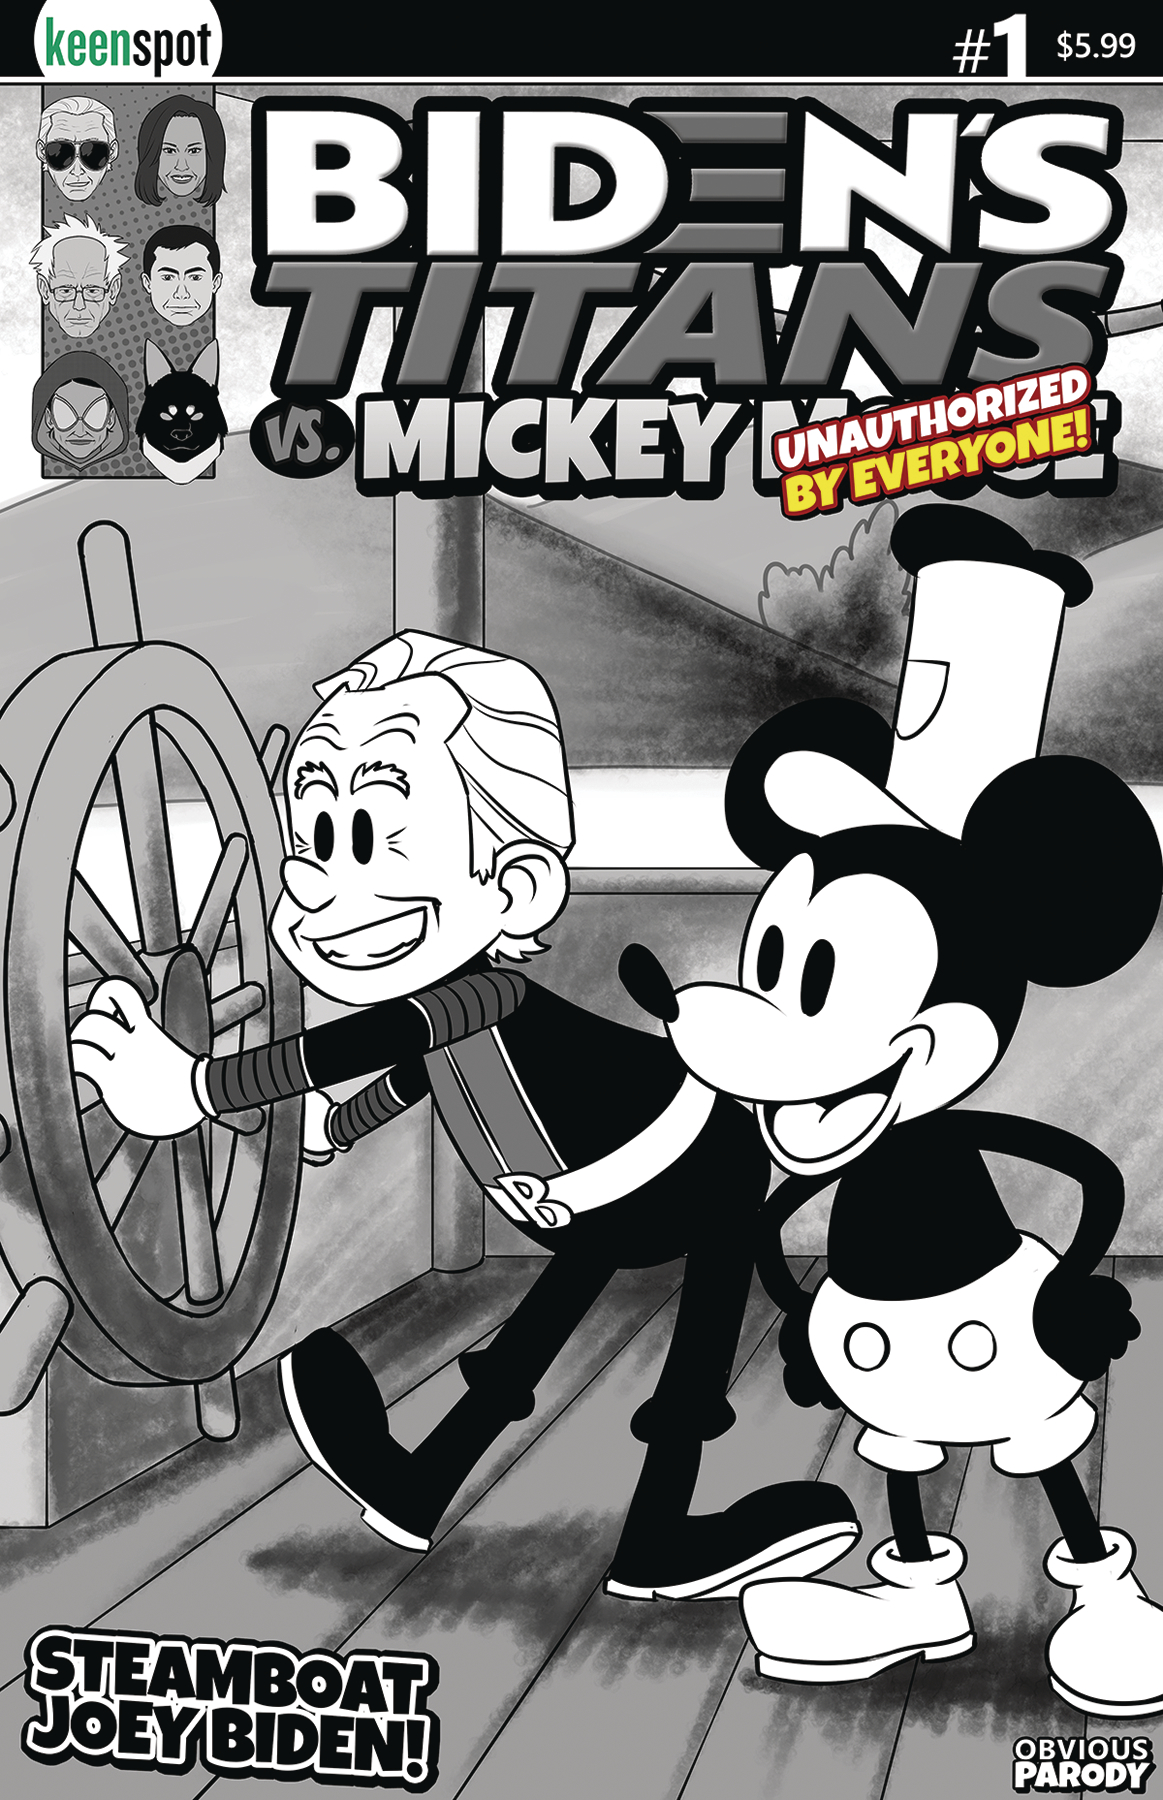 Bidens Titans Vs Mickey Mouse (Unauthorized) #1 Cover B Steamboat Joey